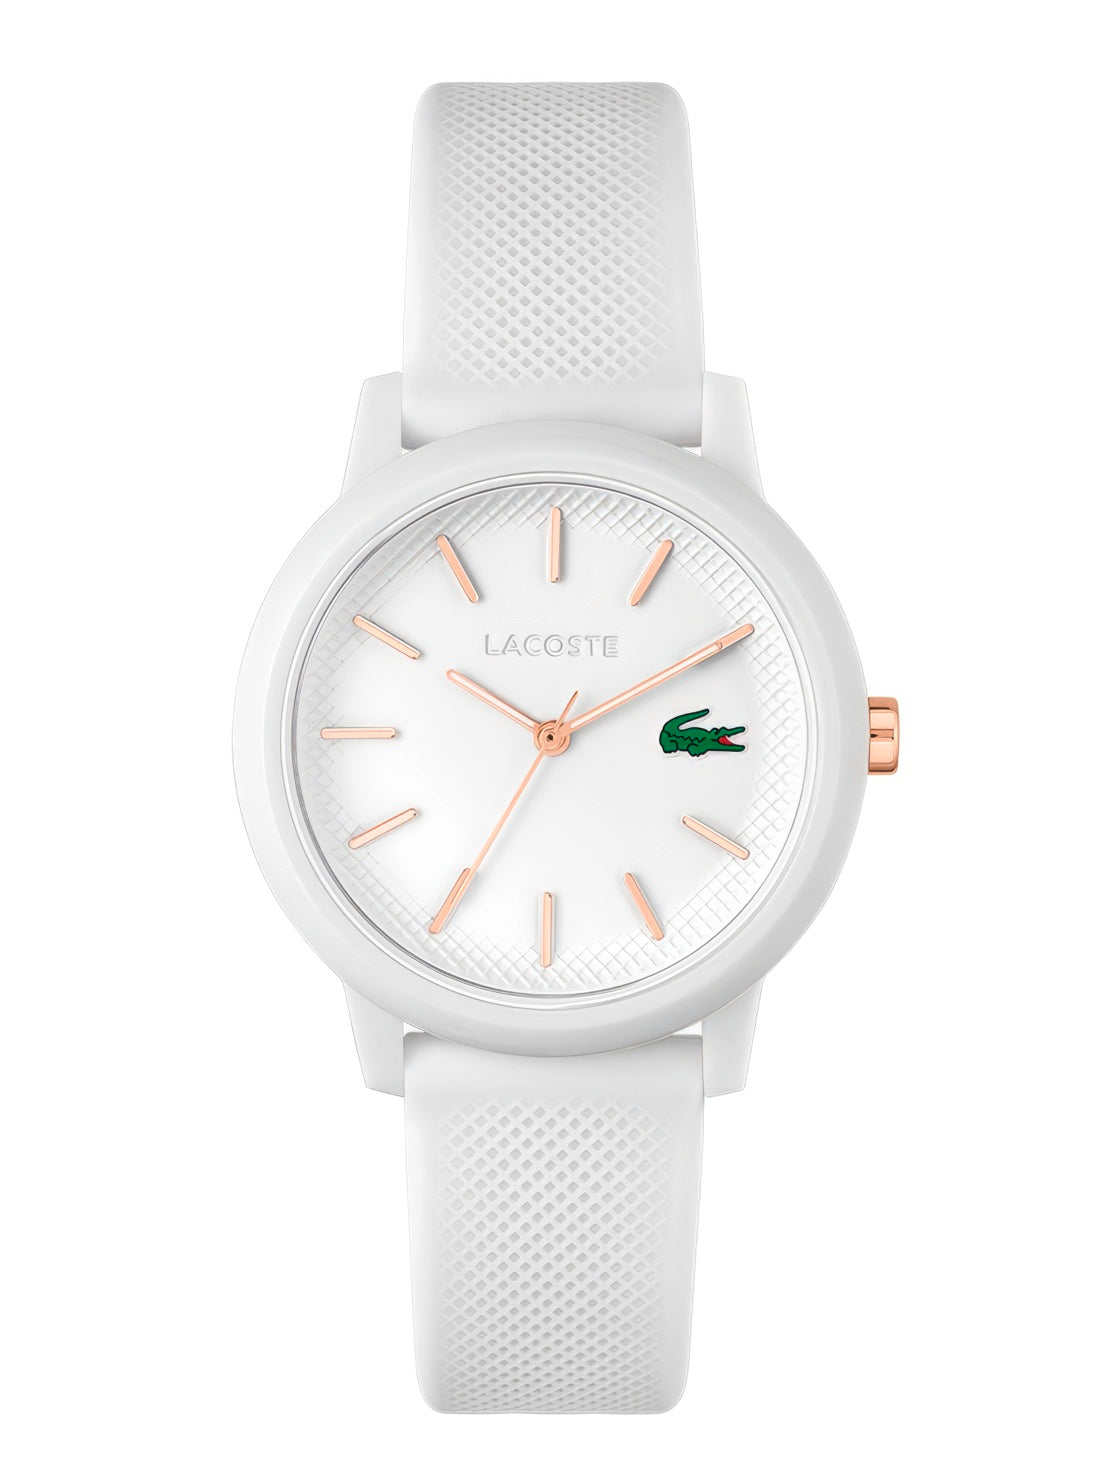 A sporty Ladies Lacoste.12.12 White Watch 2001211 with a rose gold dial.